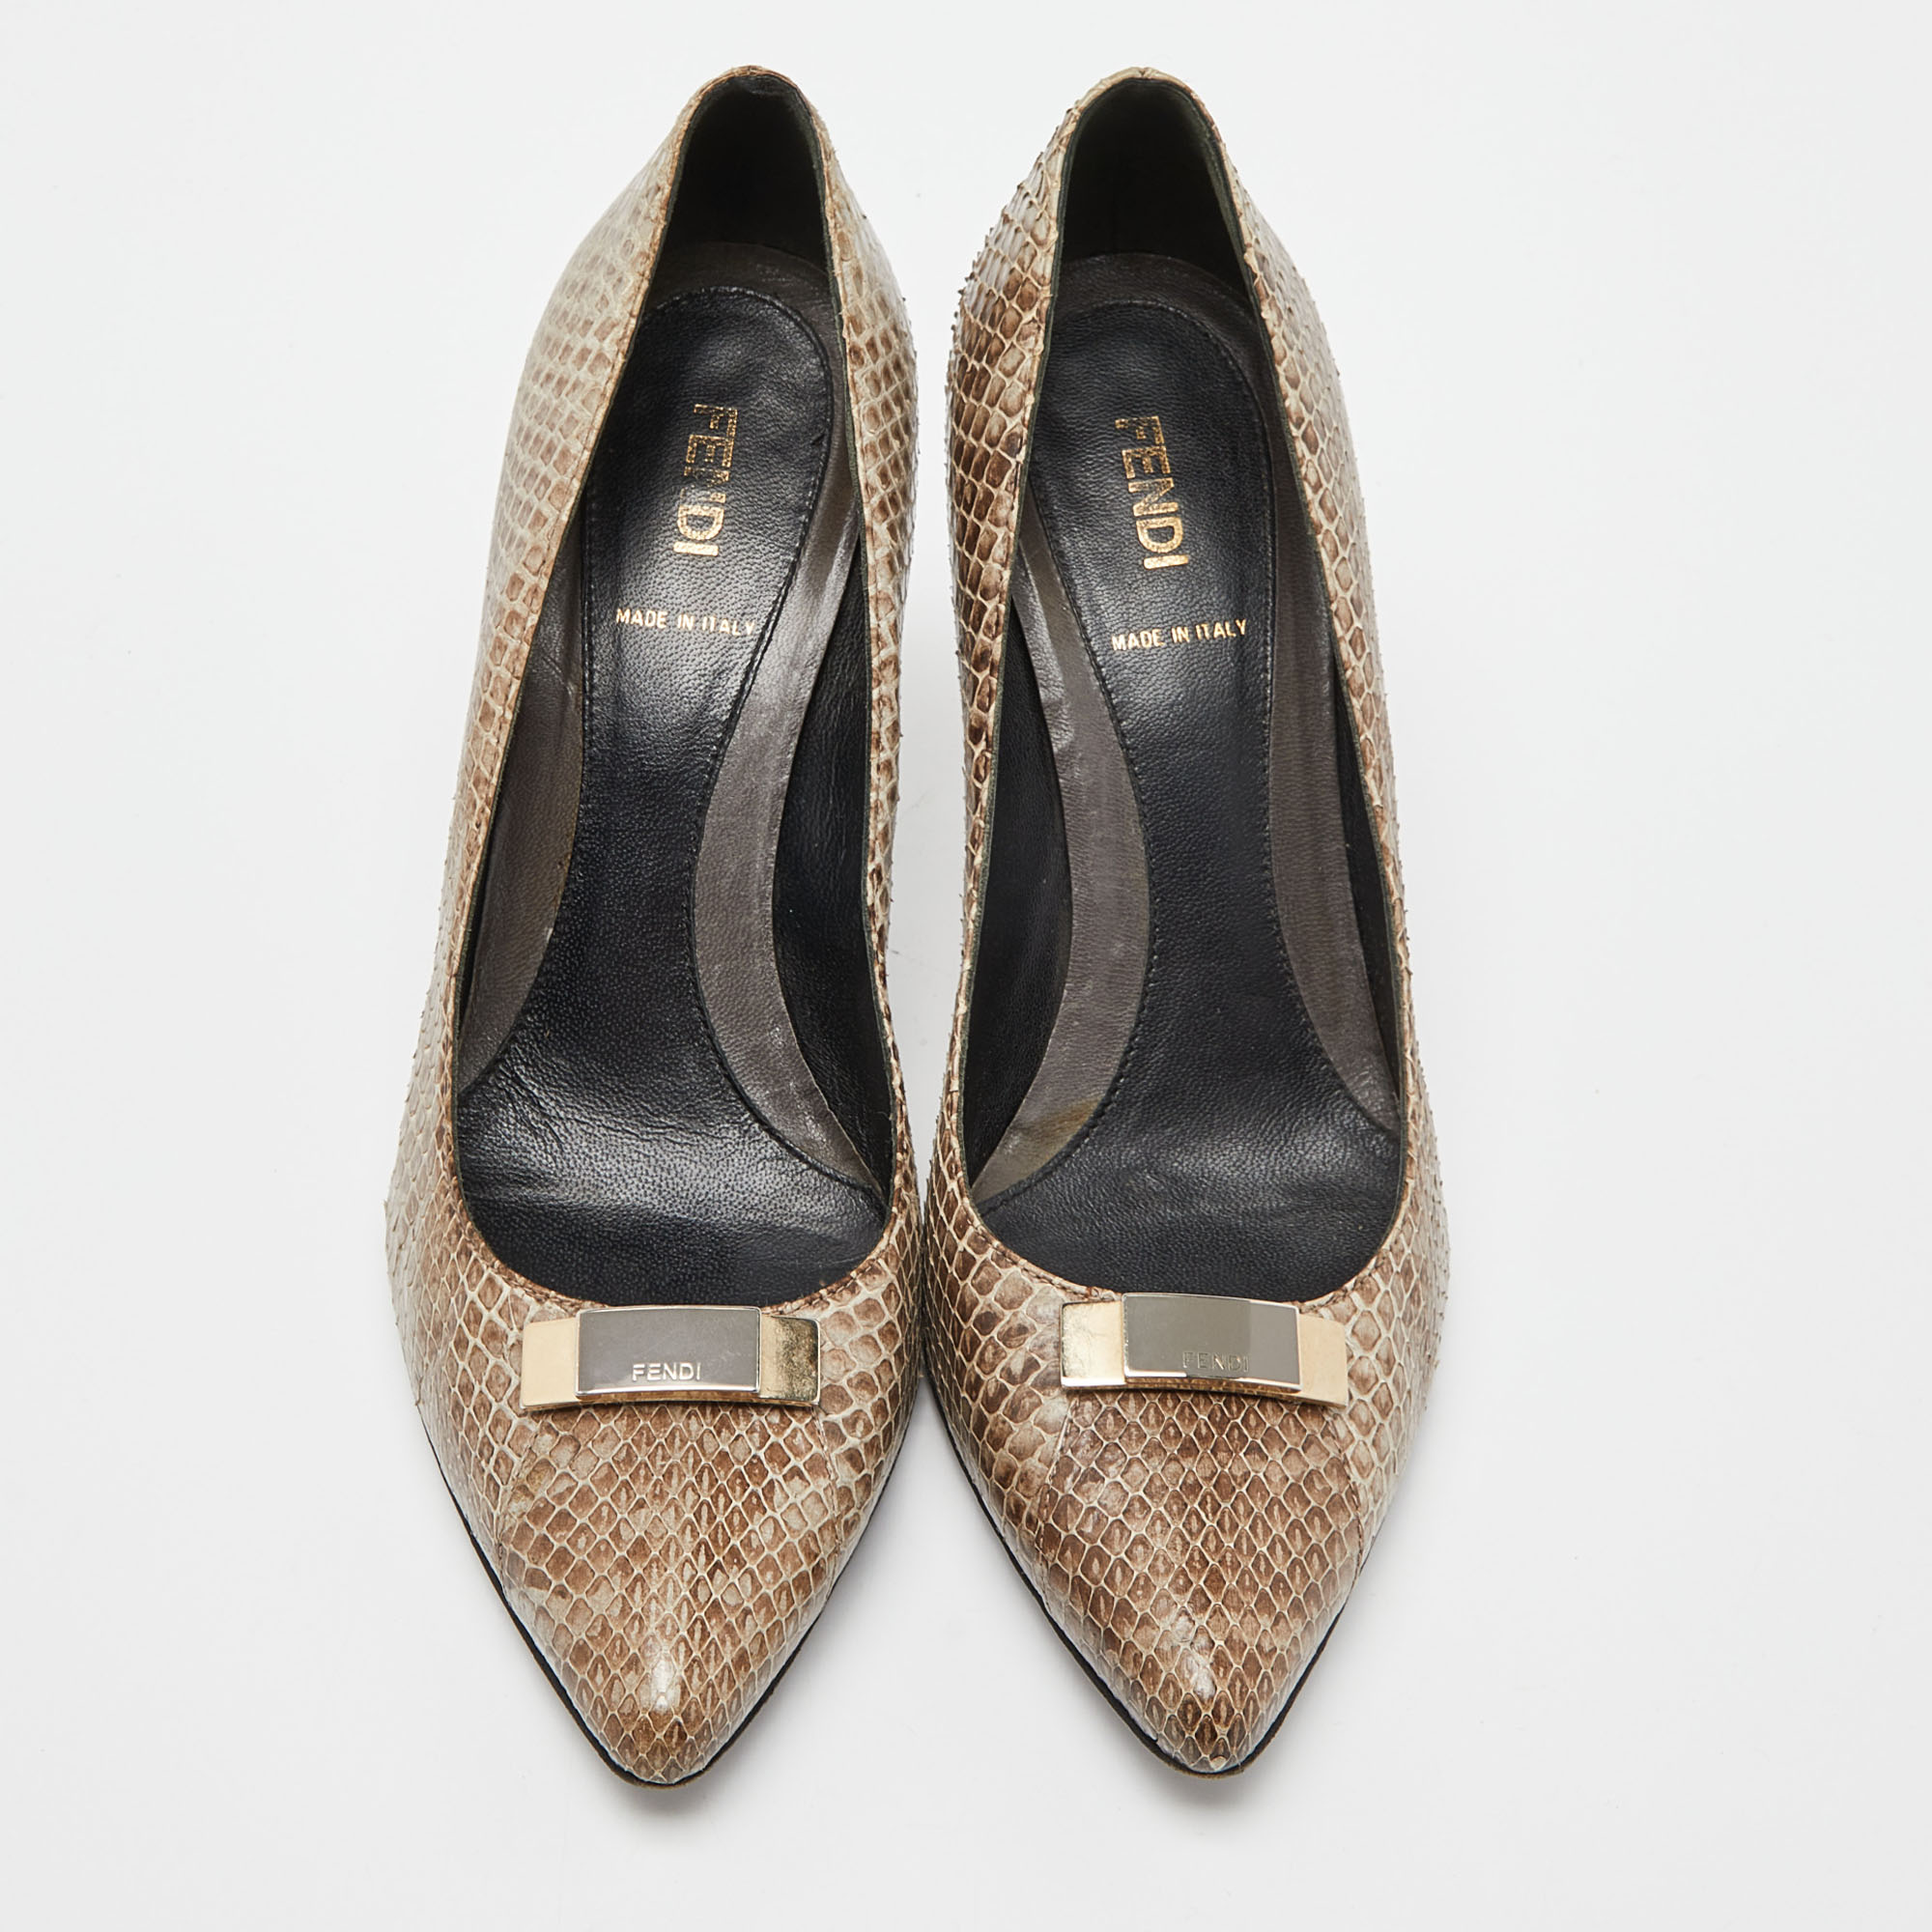 Fendi Beige/Brown Watersnake Leather Pointed Toe Pumps Size 39.5